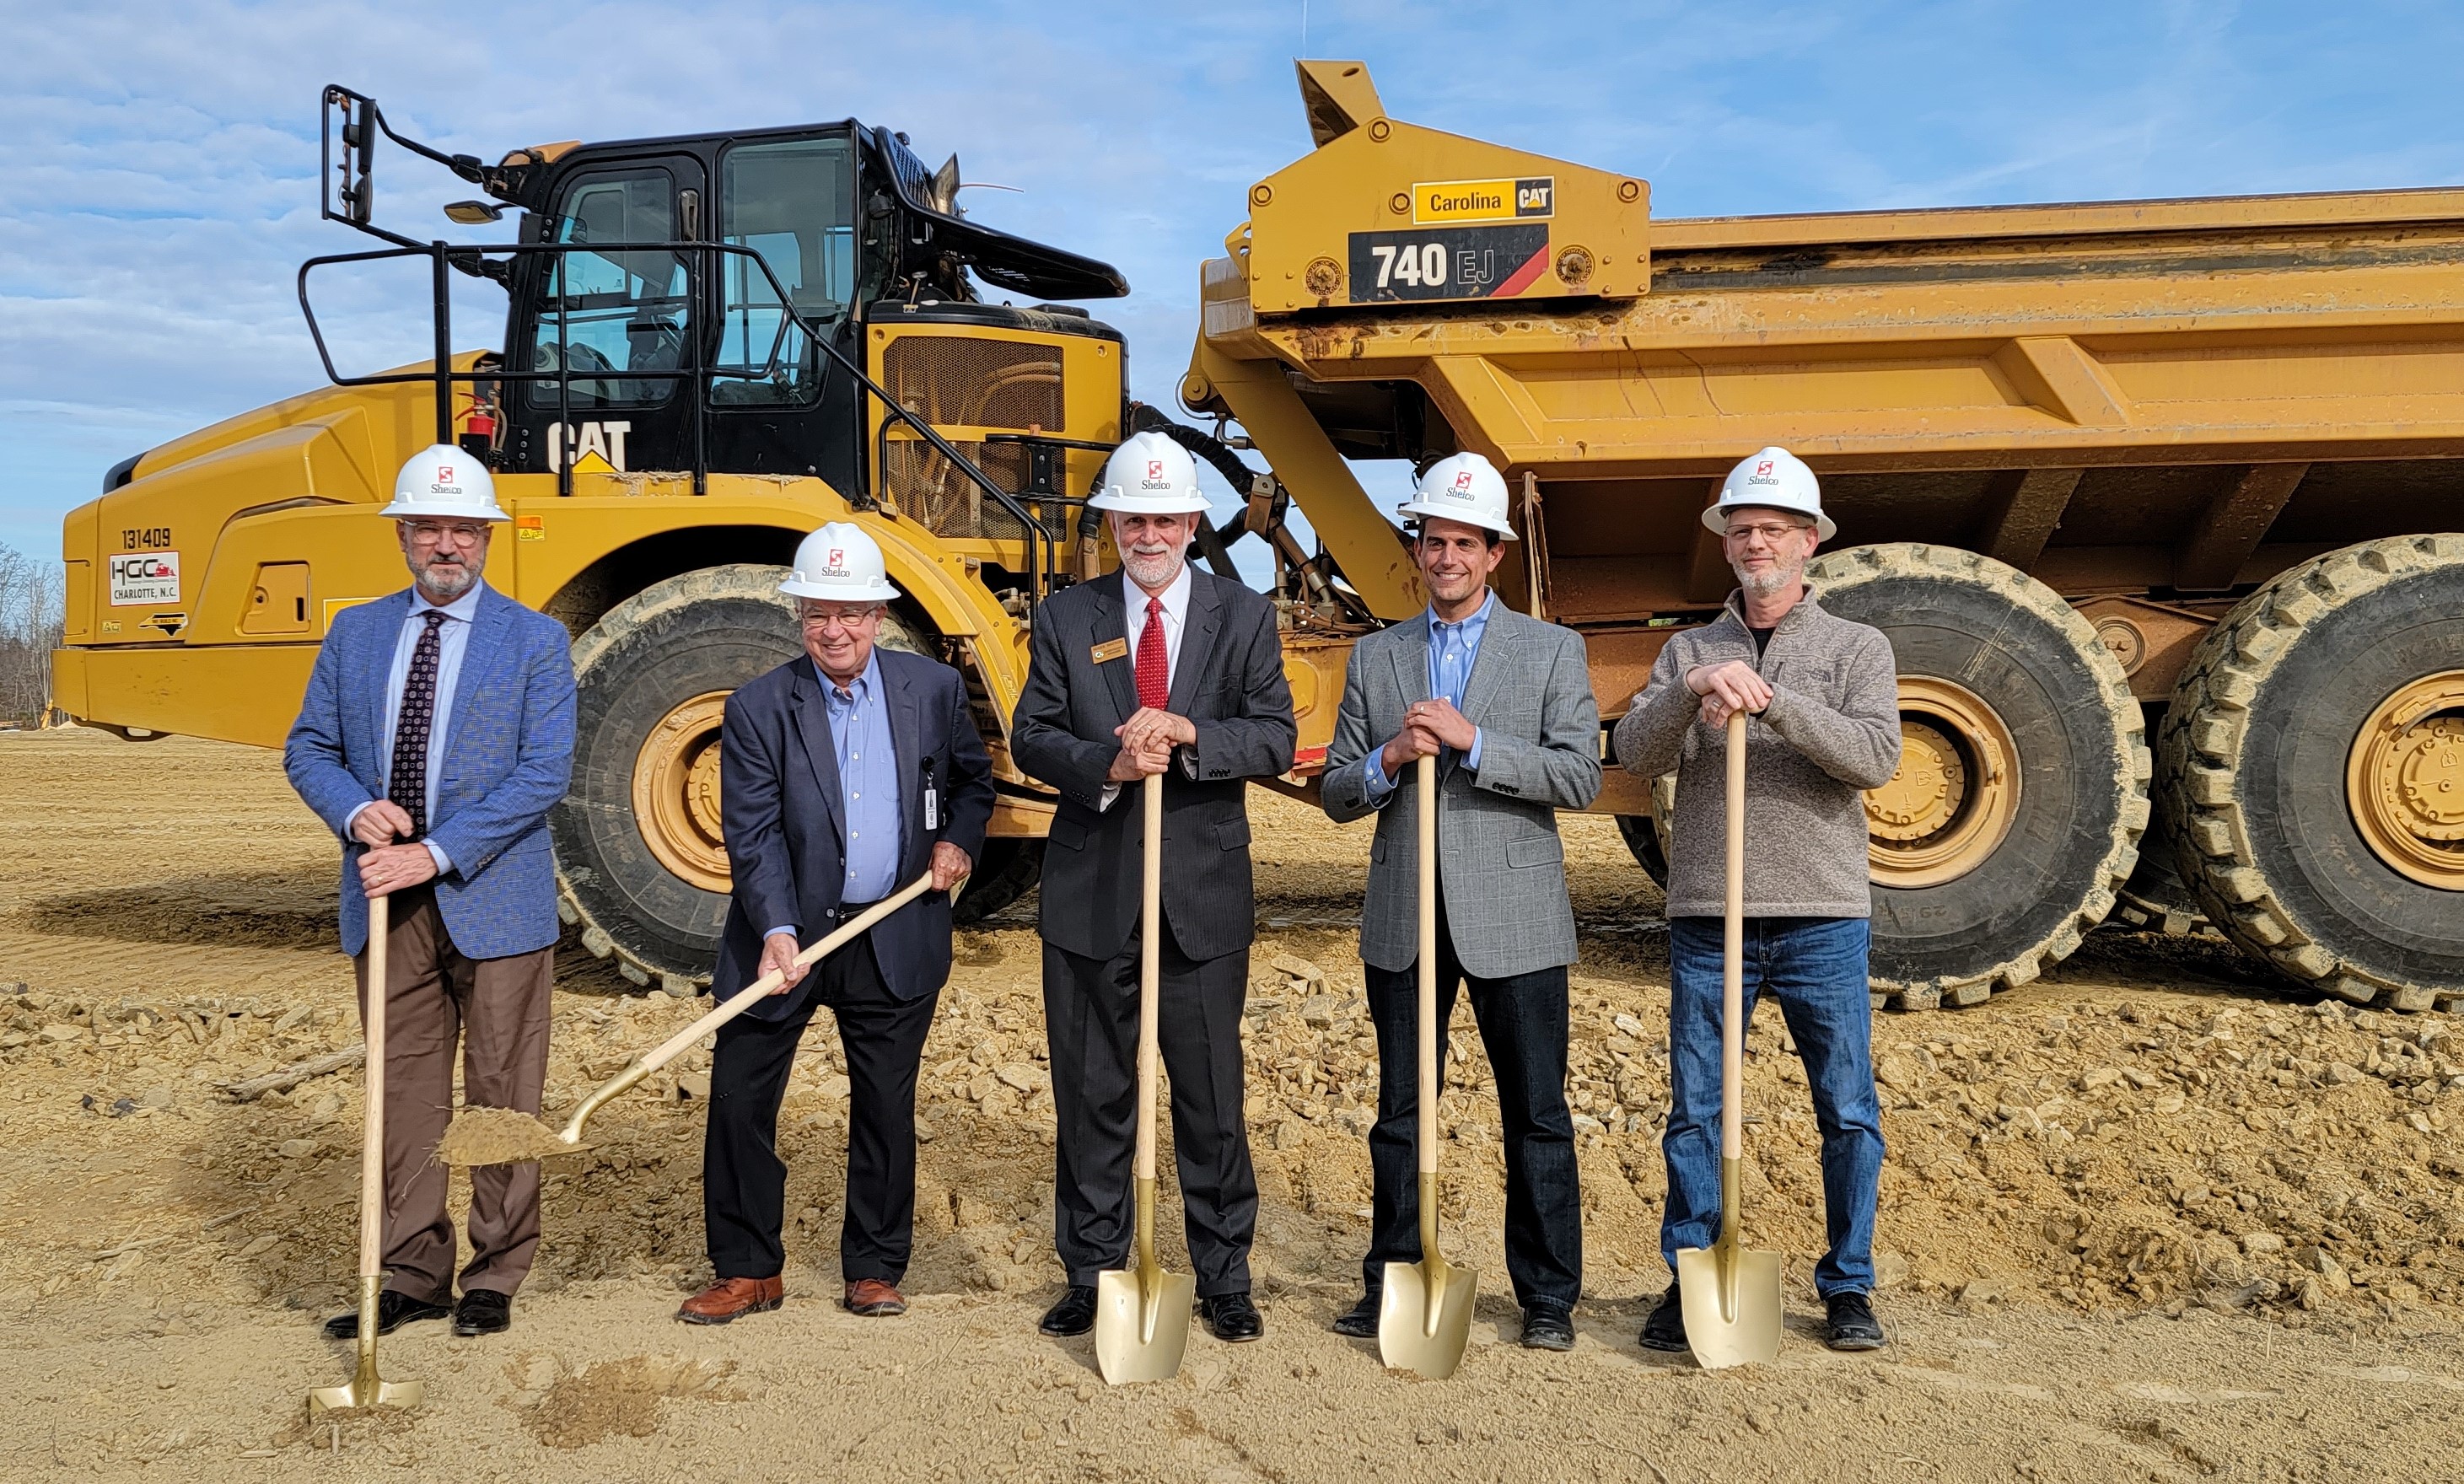 Bona Hosts Event to Break Ground on New 280,000-Square-Foot Building